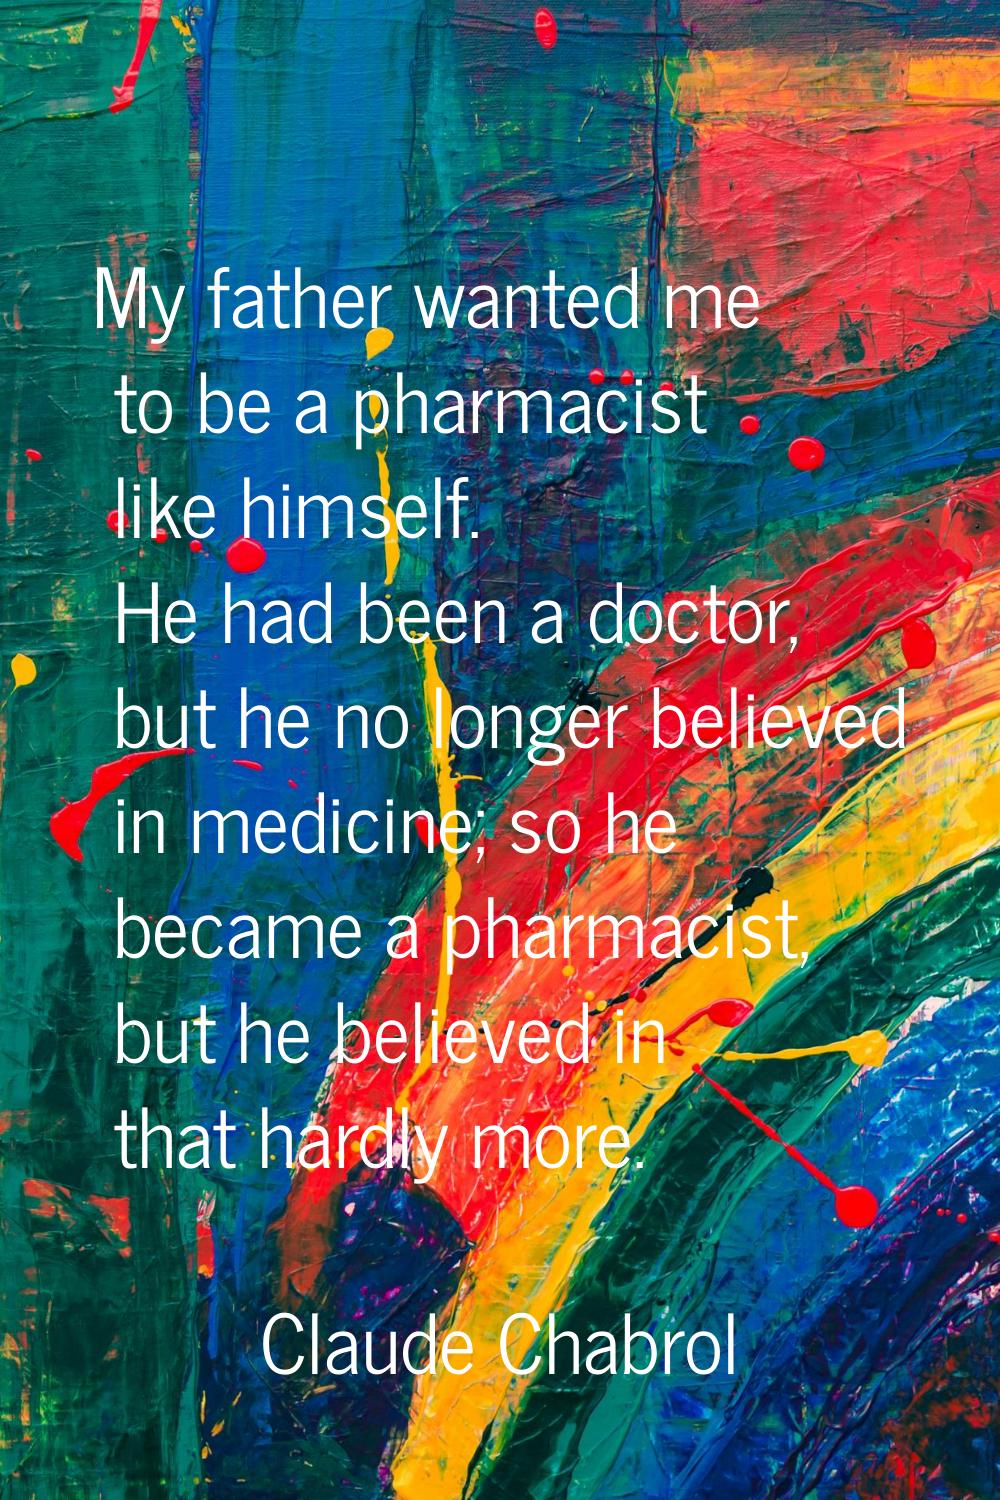 My father wanted me to be a pharmacist like himself. He had been a doctor, but he no longer believe